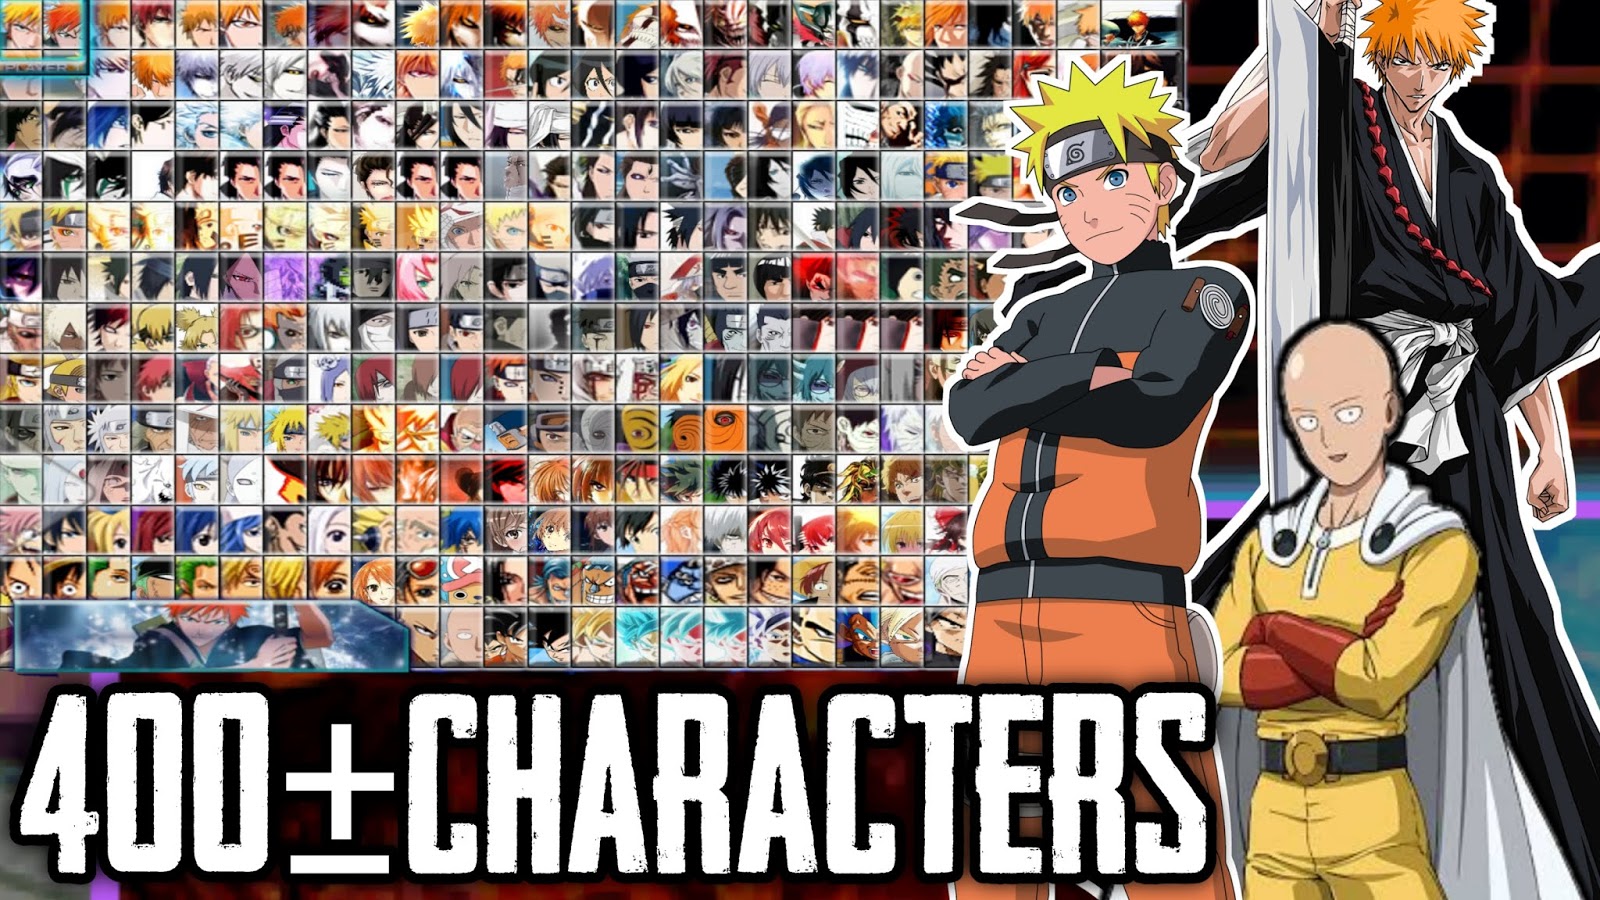 Bleach Vs Naruto Mugen Apk With 400 Characters Download